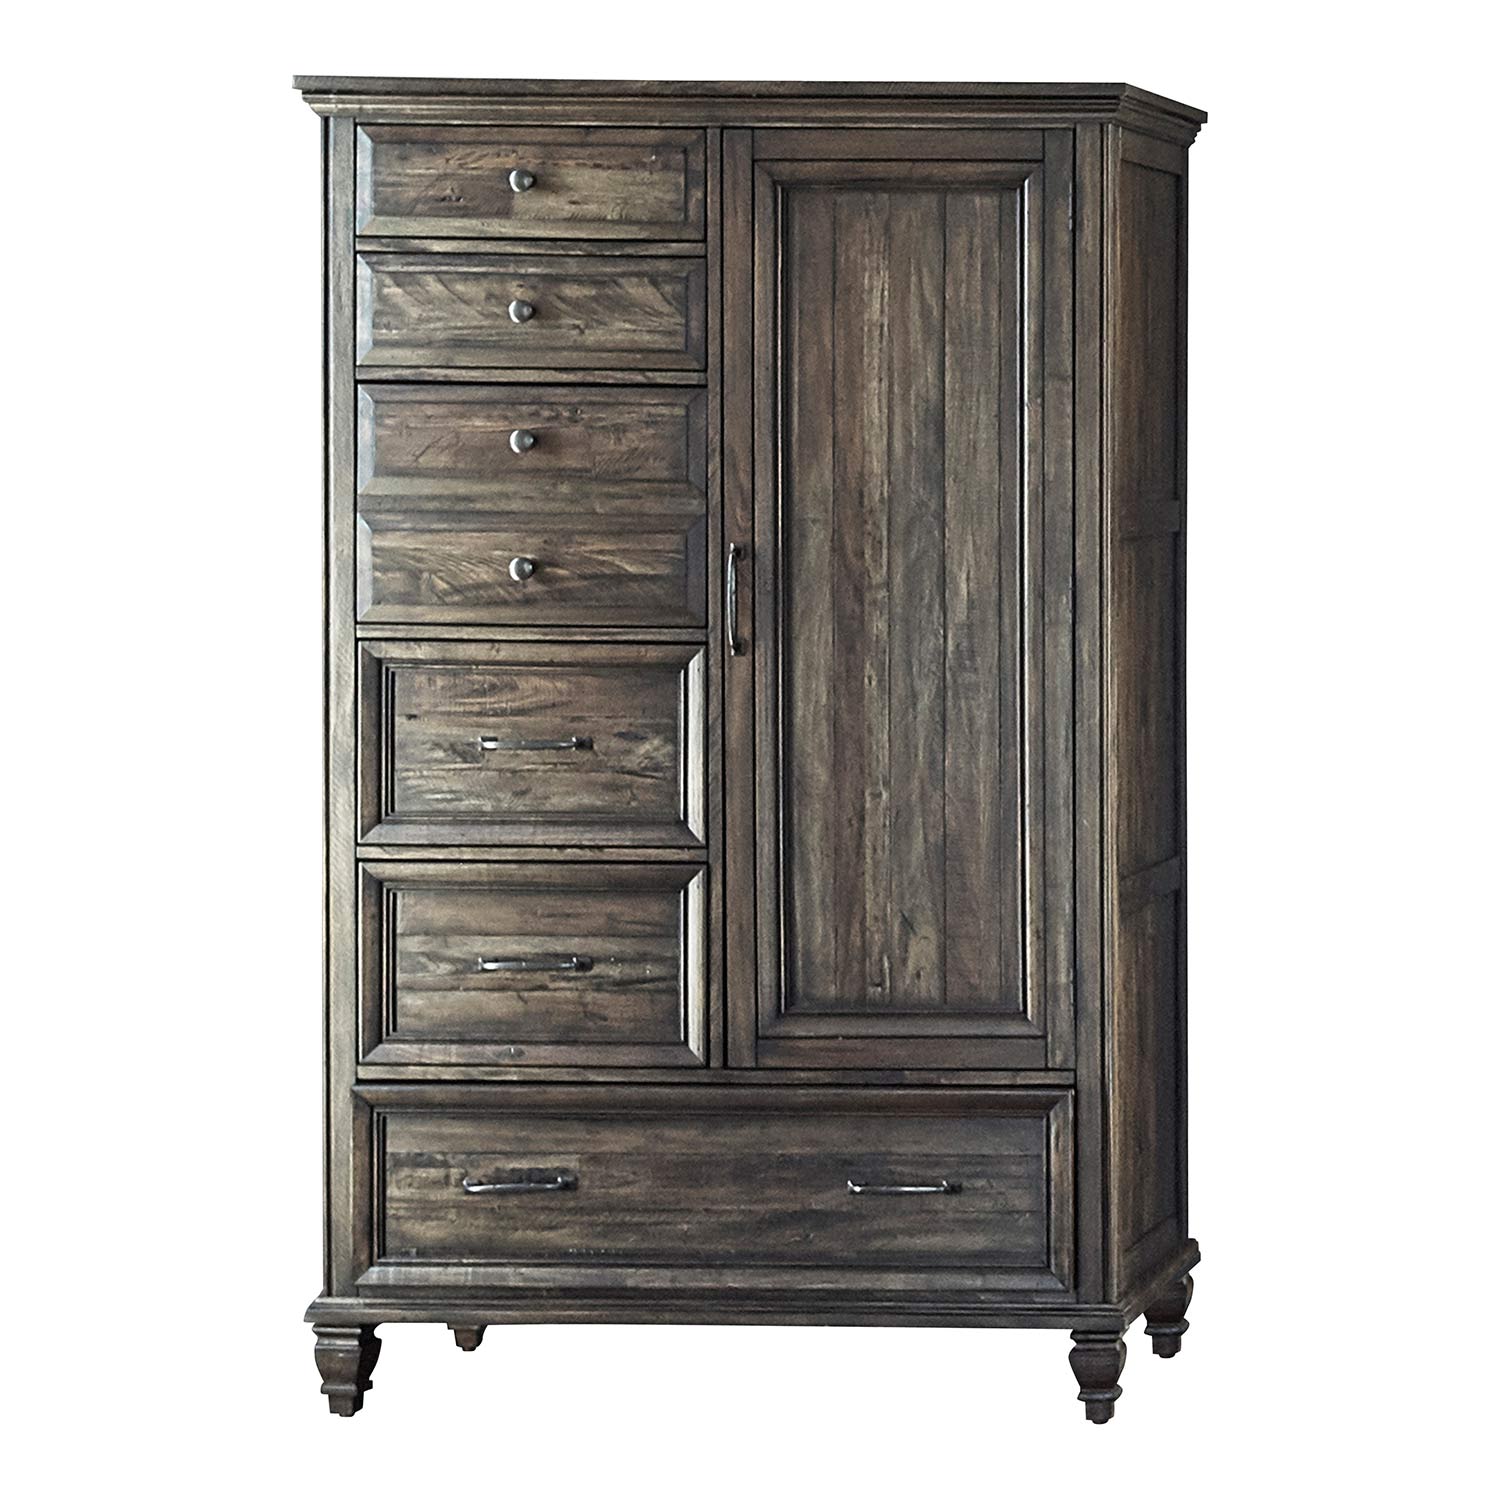 Coaster Avenue Door Chest - Weathered Burnished Brown